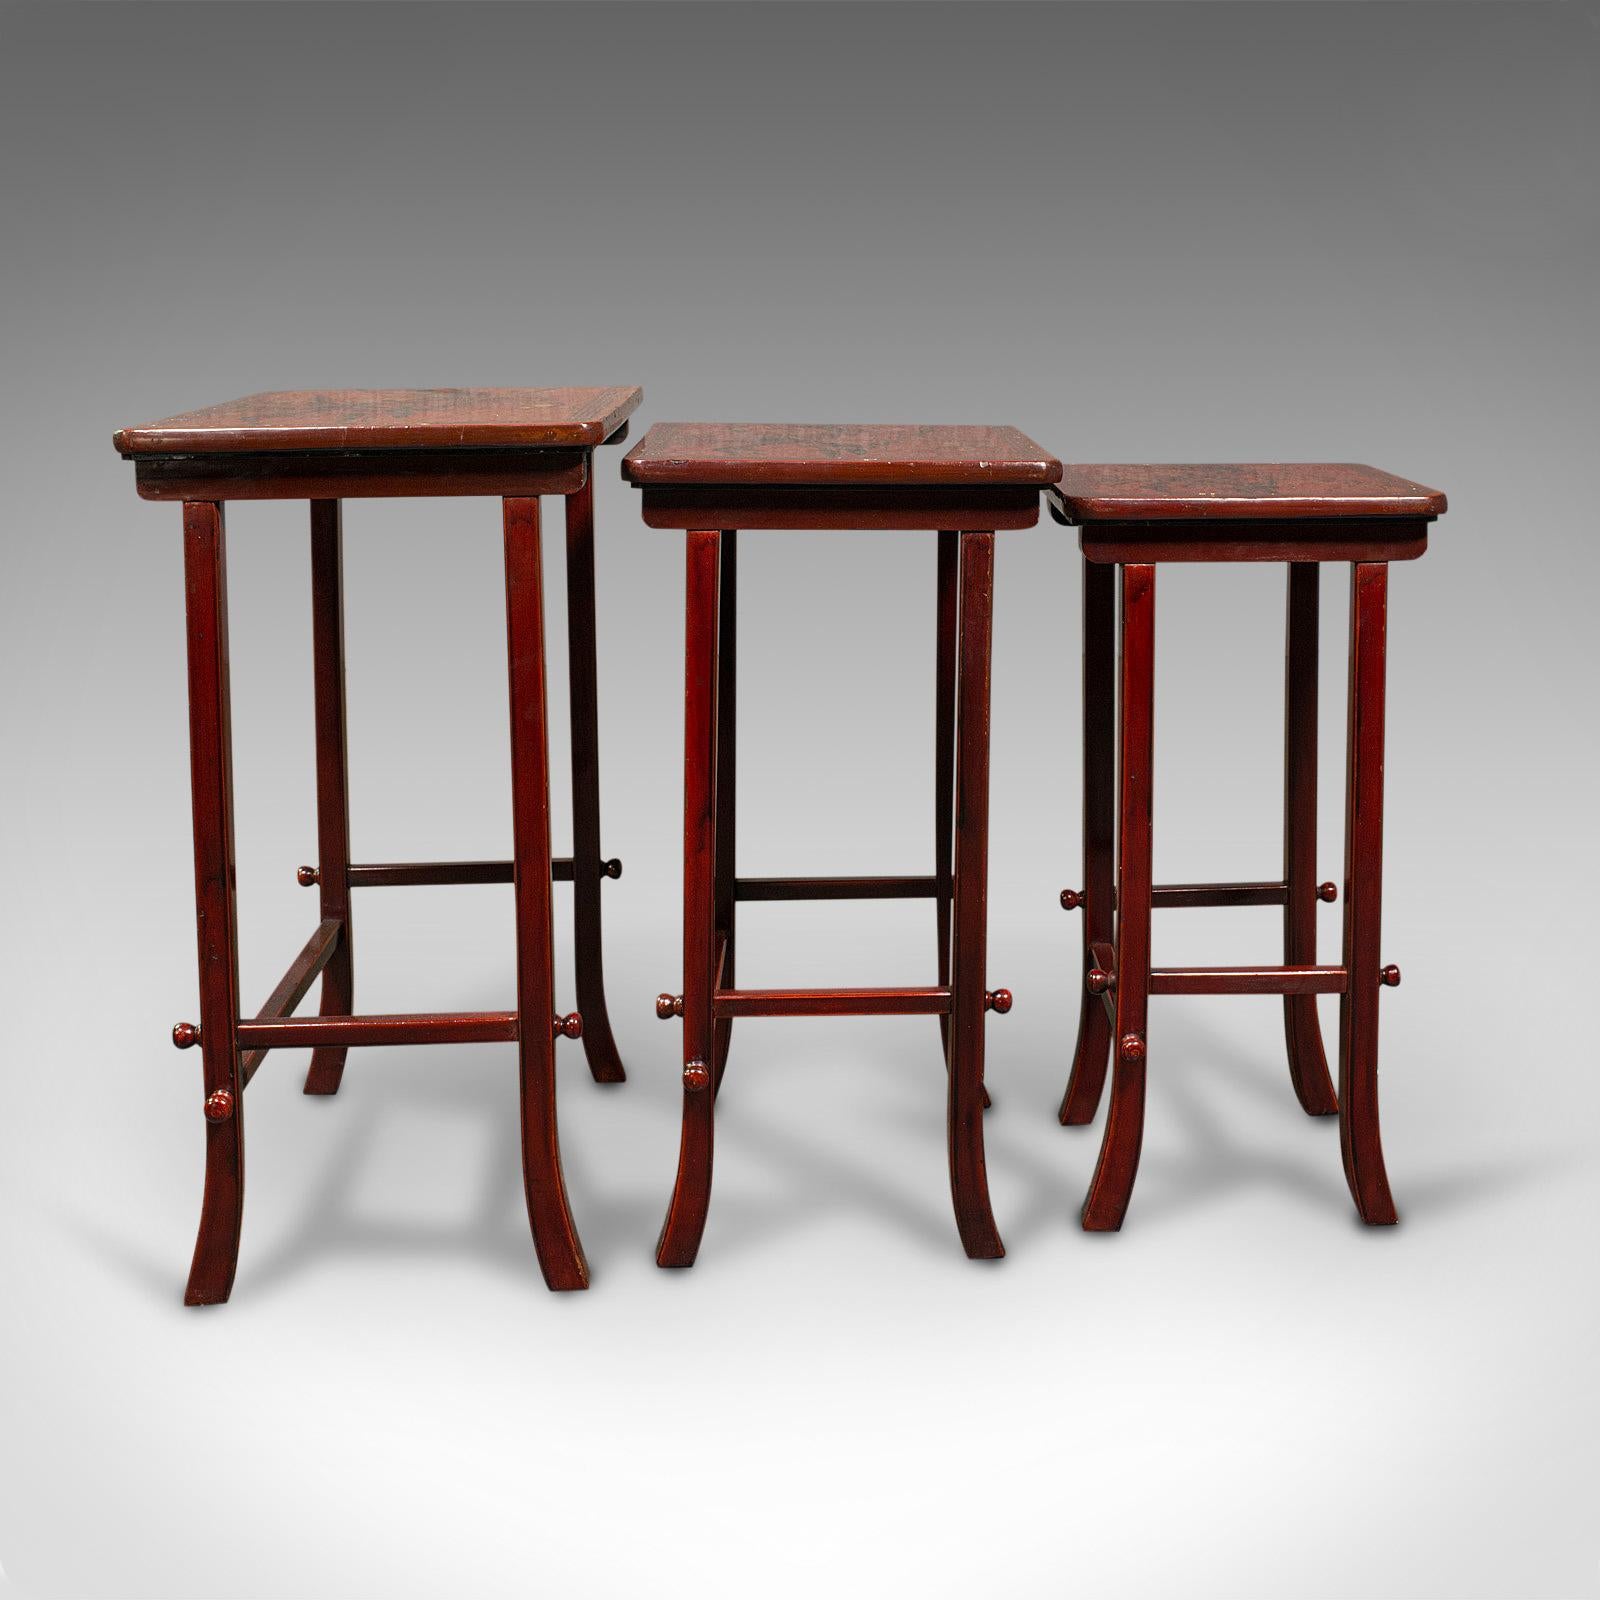 Antique Nest of 3 Occasional Side Tables, Oriental, Japanned, Victorian, C.1900 For Sale 1